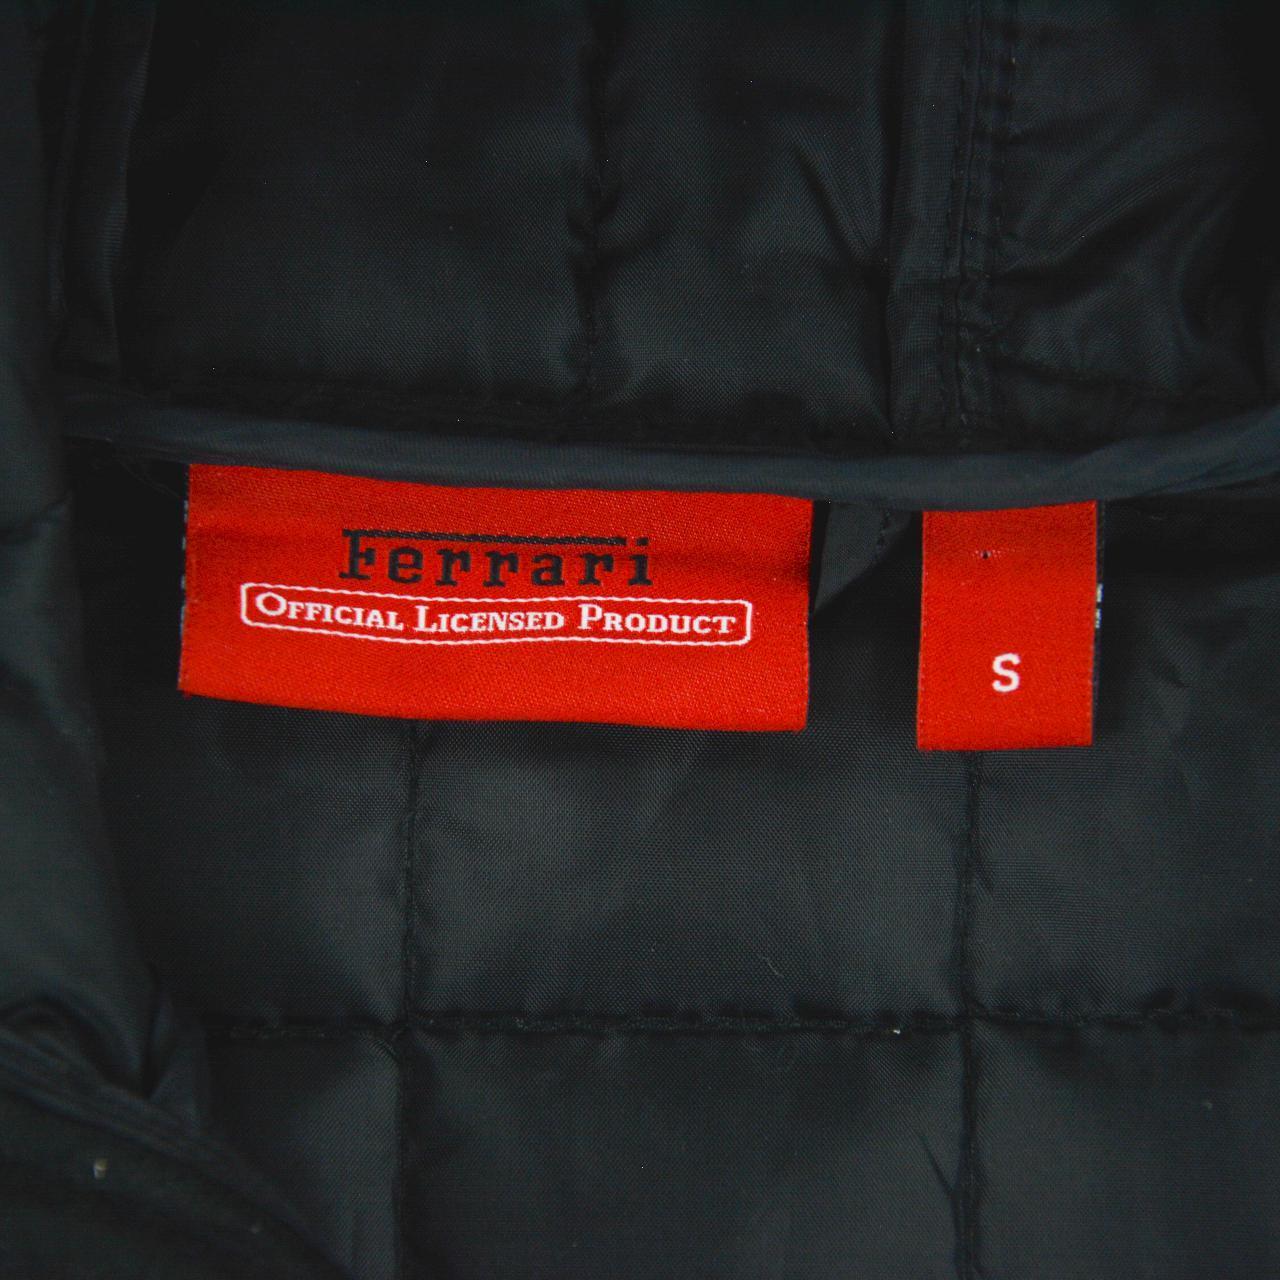 Vintage Ferrari Padded Jacket Woman’s Size S - Known Source